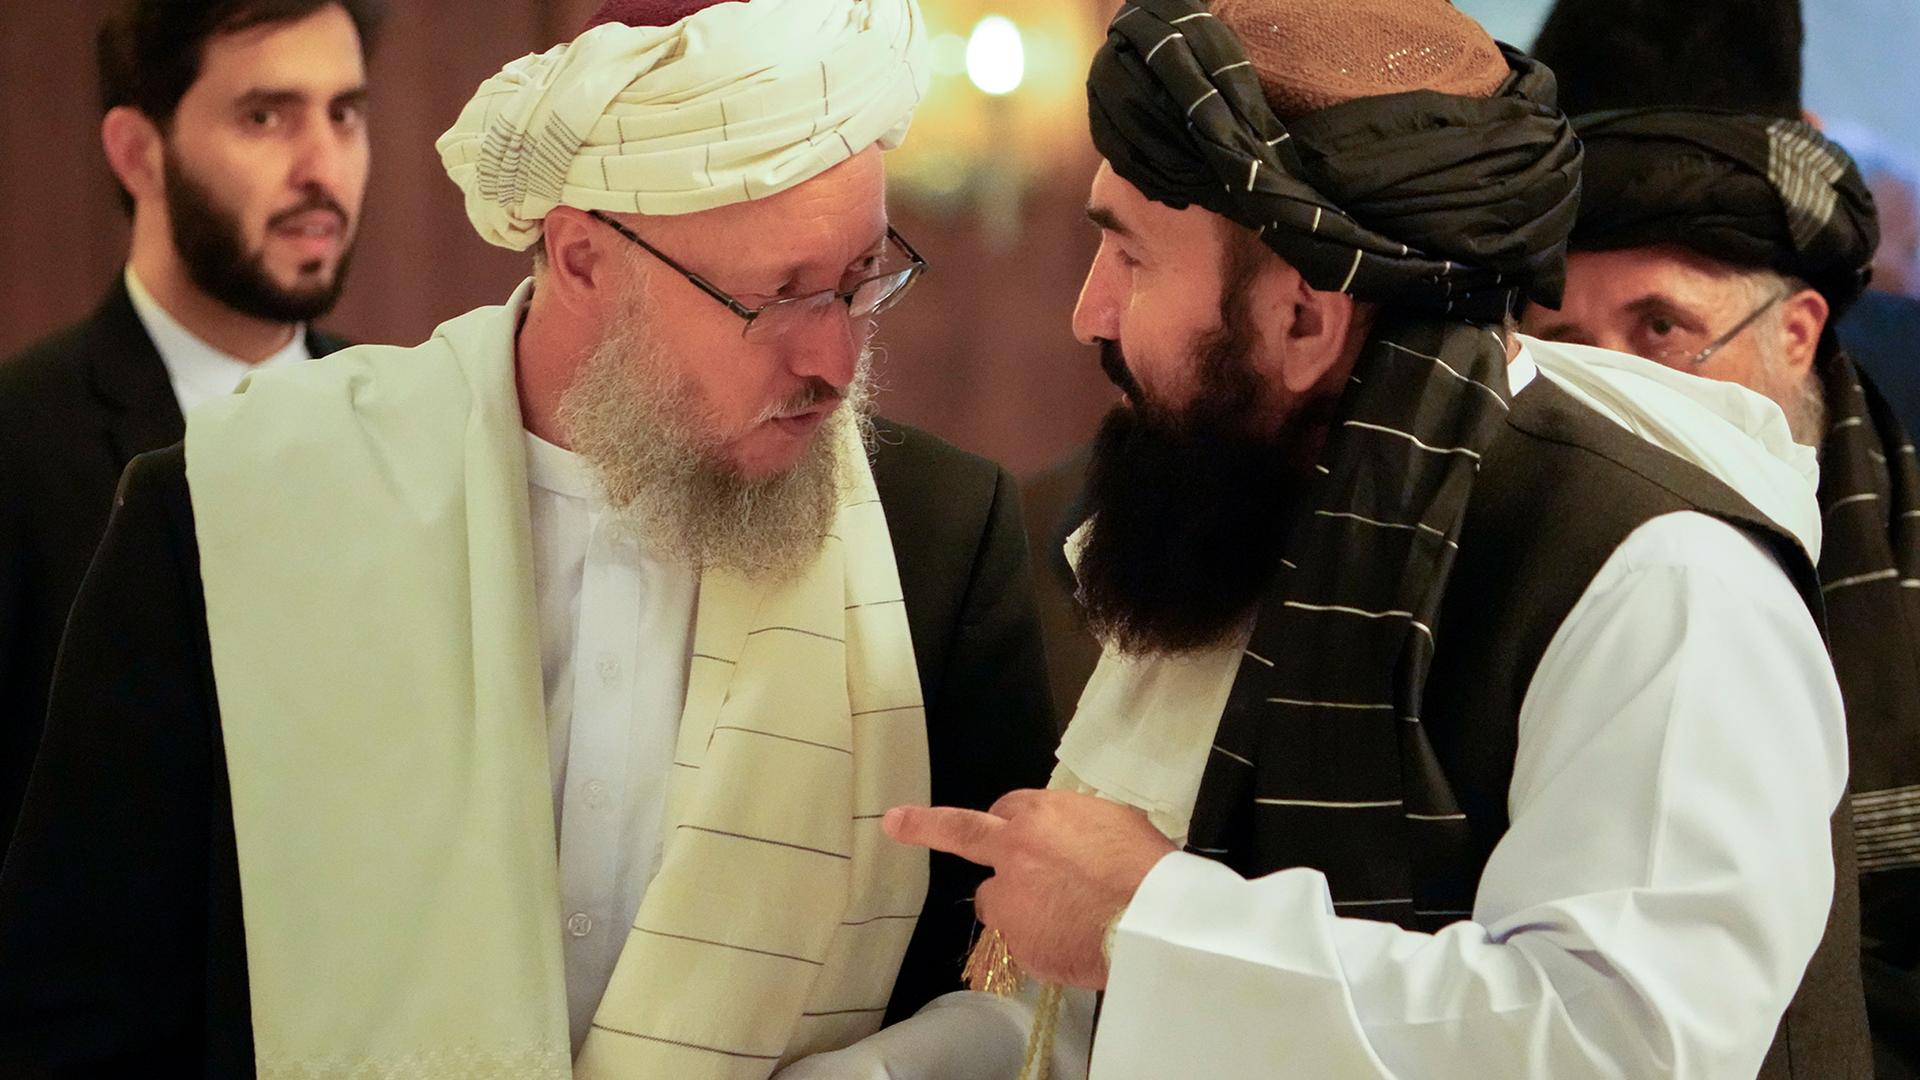 Abdul Salam Hanafi, a deputy prime minister in the Taliban's interim government, left, speaks with acting Foreign Minister of Afghanistan, Taliban official Amir Khan Muttaqi during talks involving Afghan representatives in Moscow, Russia